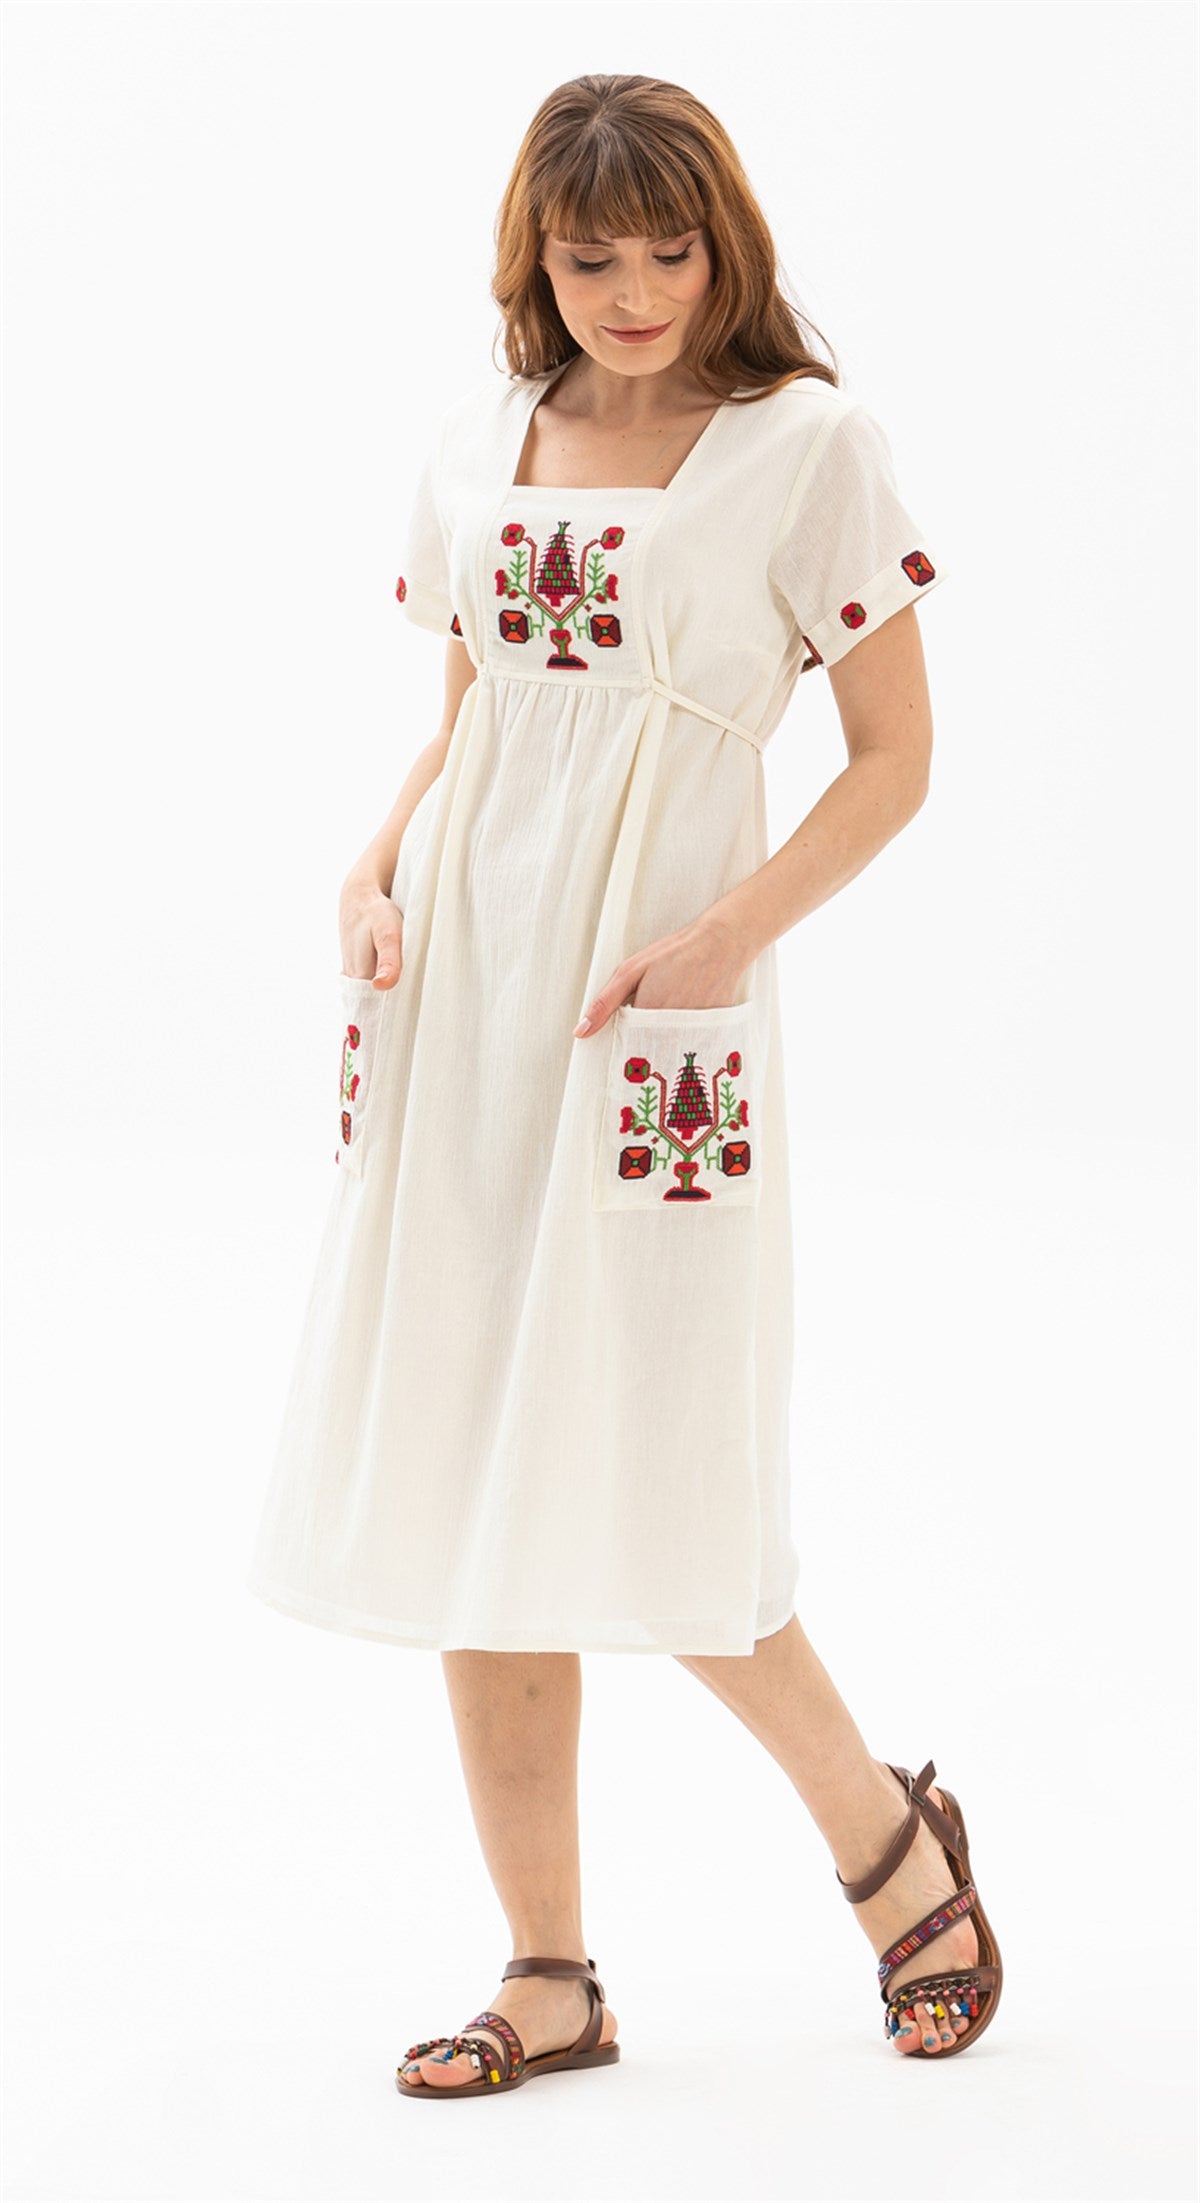 Short Sleeve Ethnic Embroidered Long Dress Made of Sile Cloth